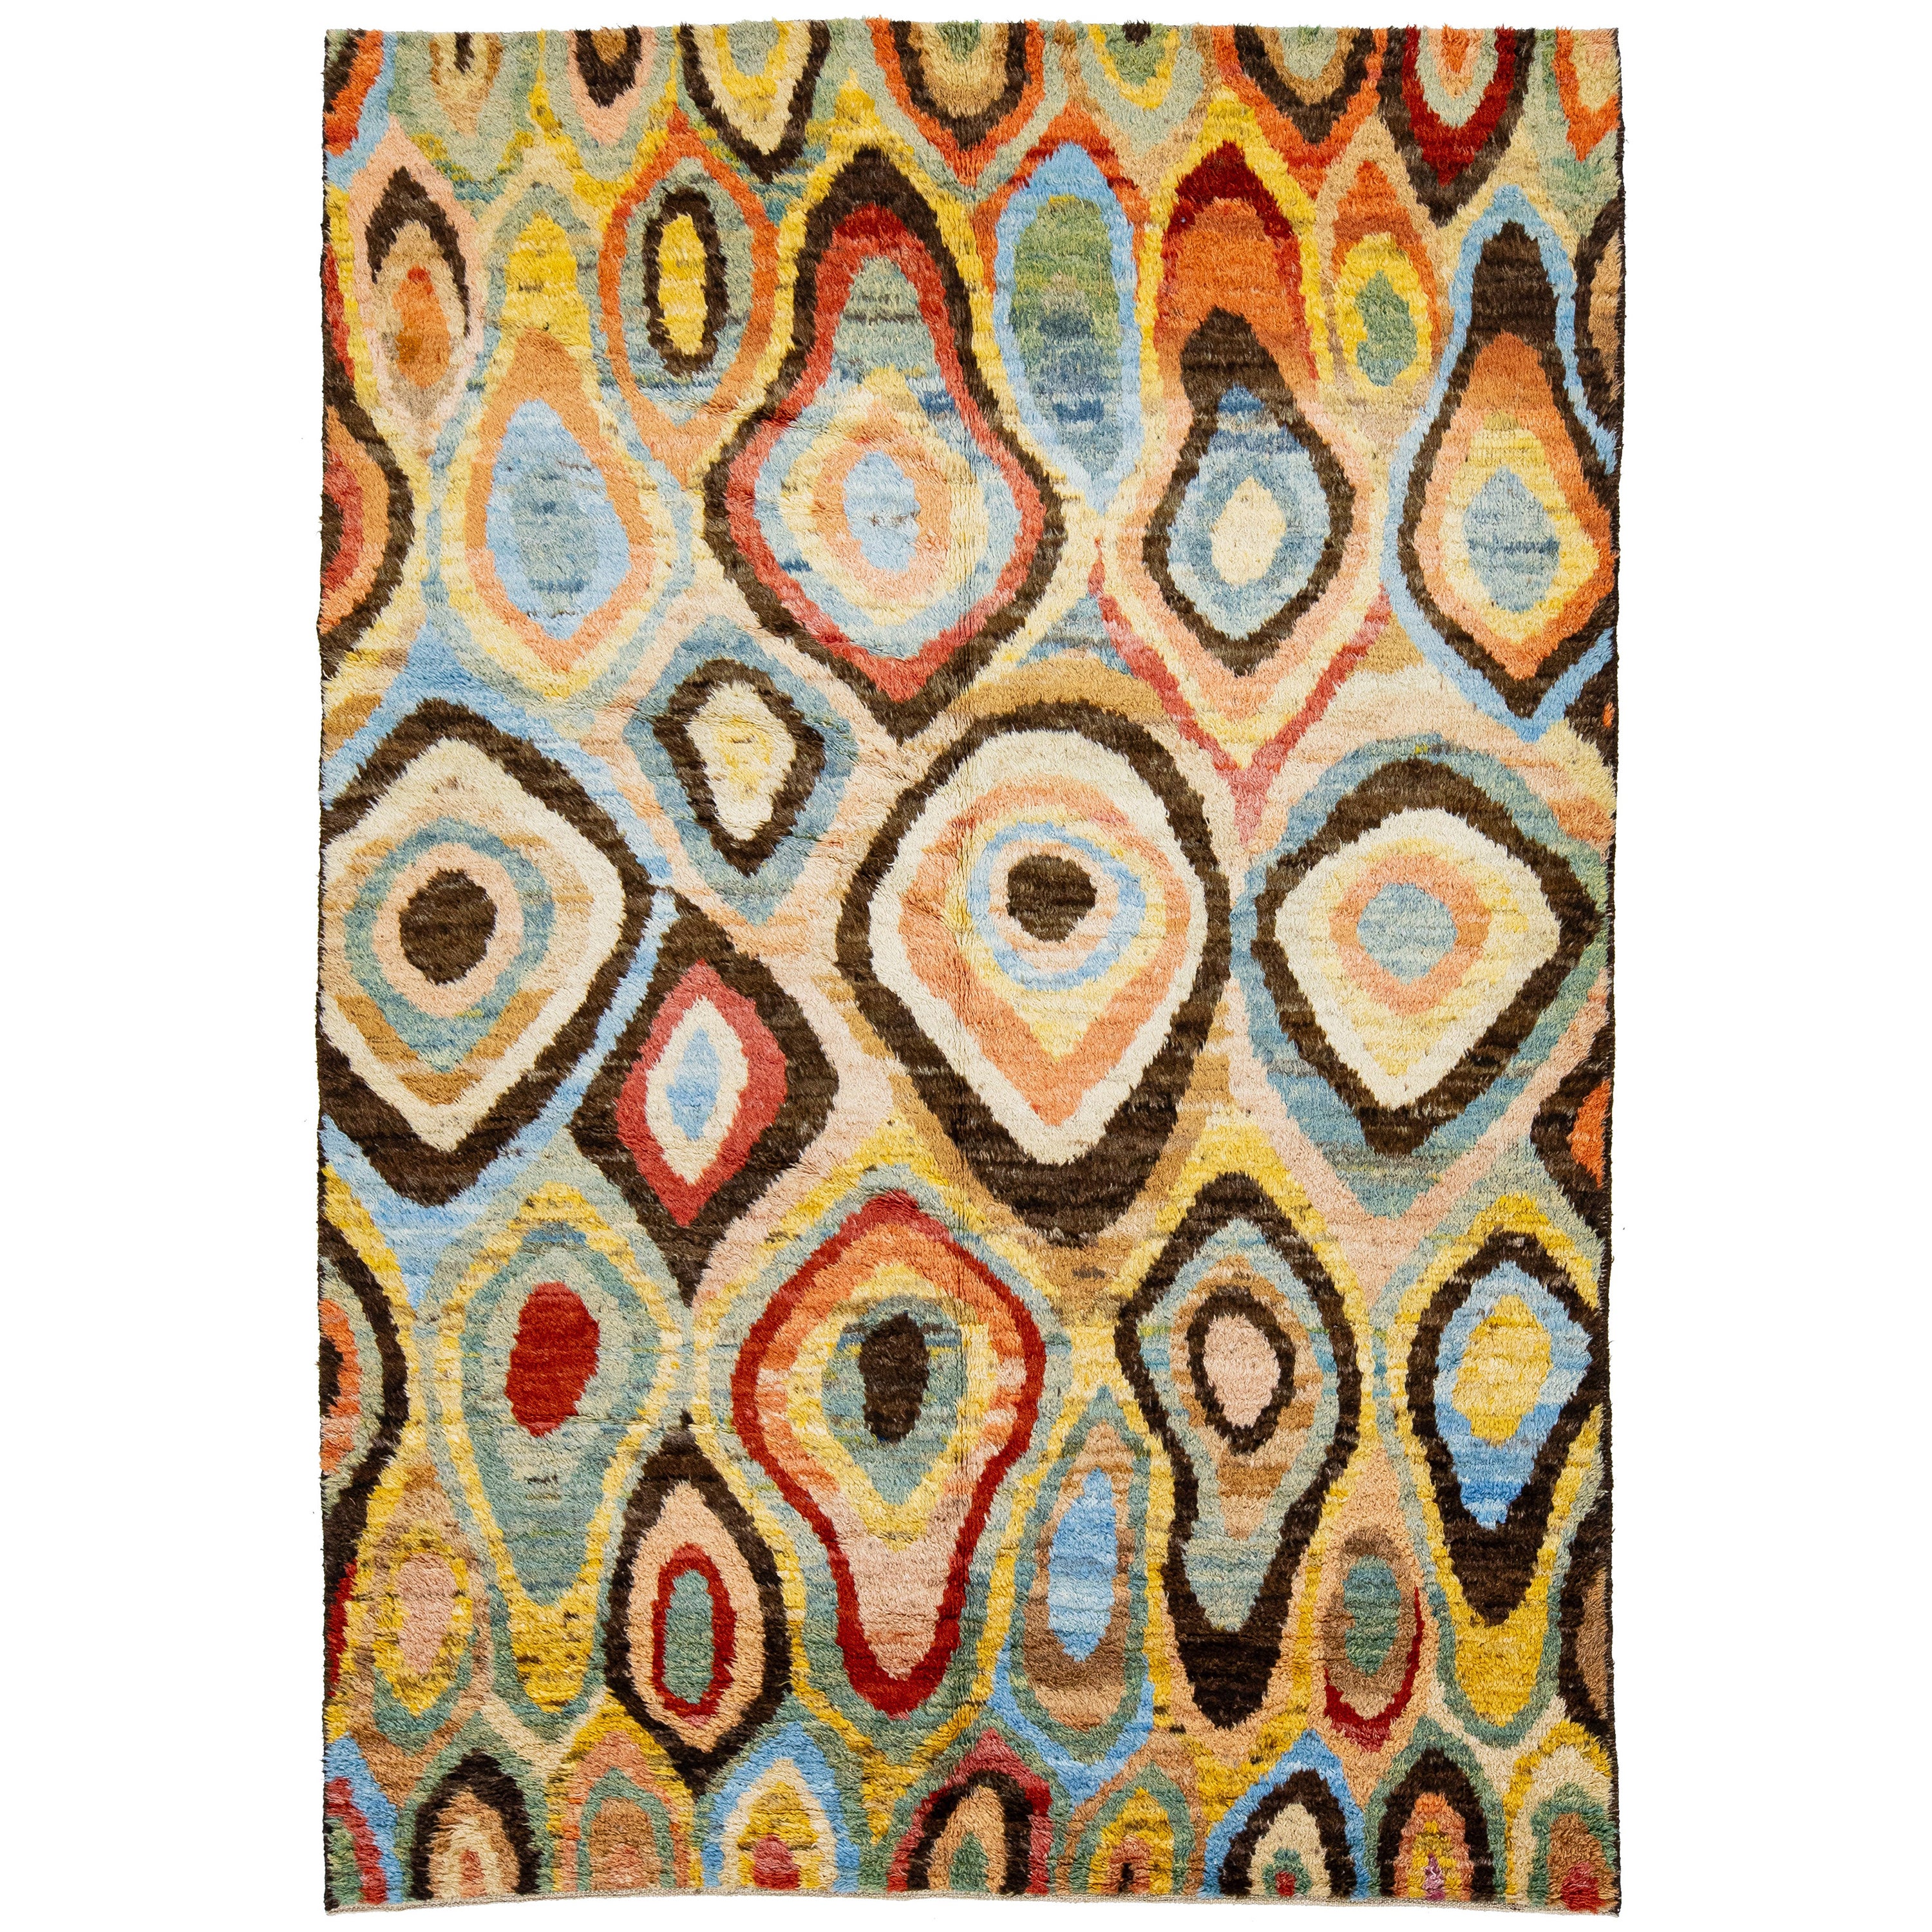 Contemporary Handmade Moroccan-Style Wool Rug In Multicolor by Apadana For Sale